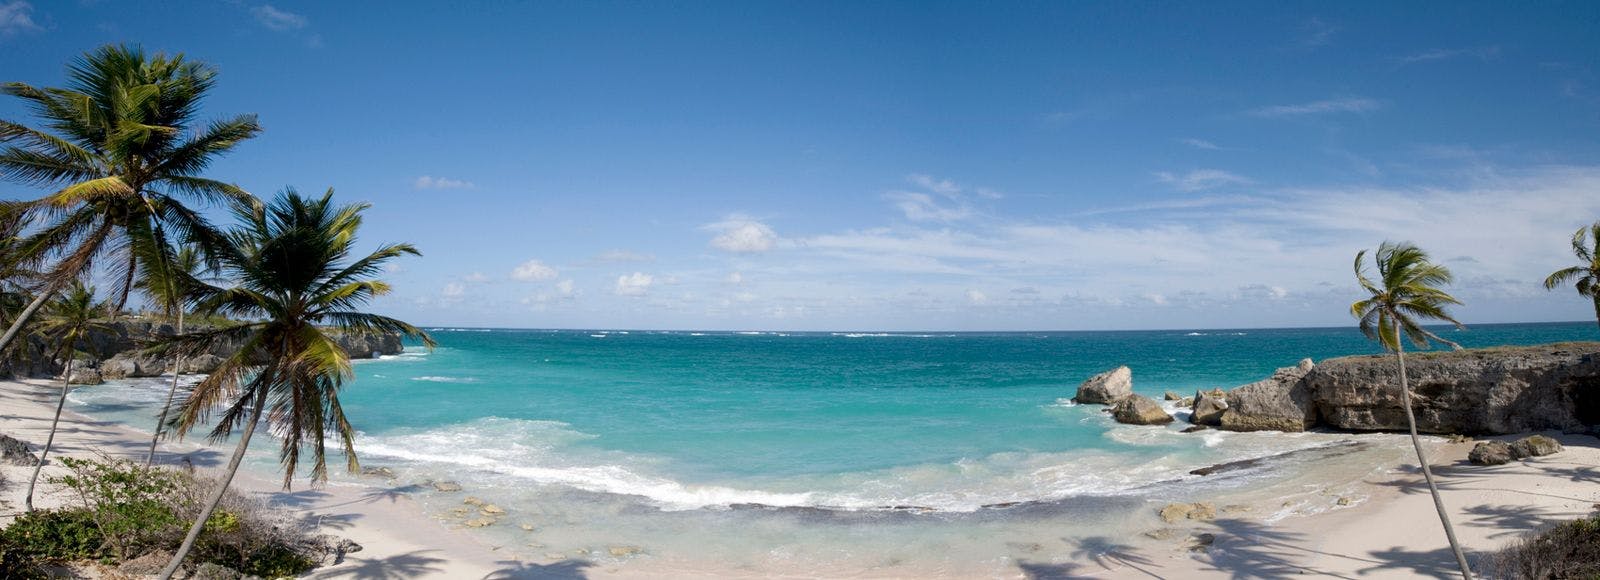 Panoramic view of a white sand beach in Barbados with palm trees, and clear blue sea 